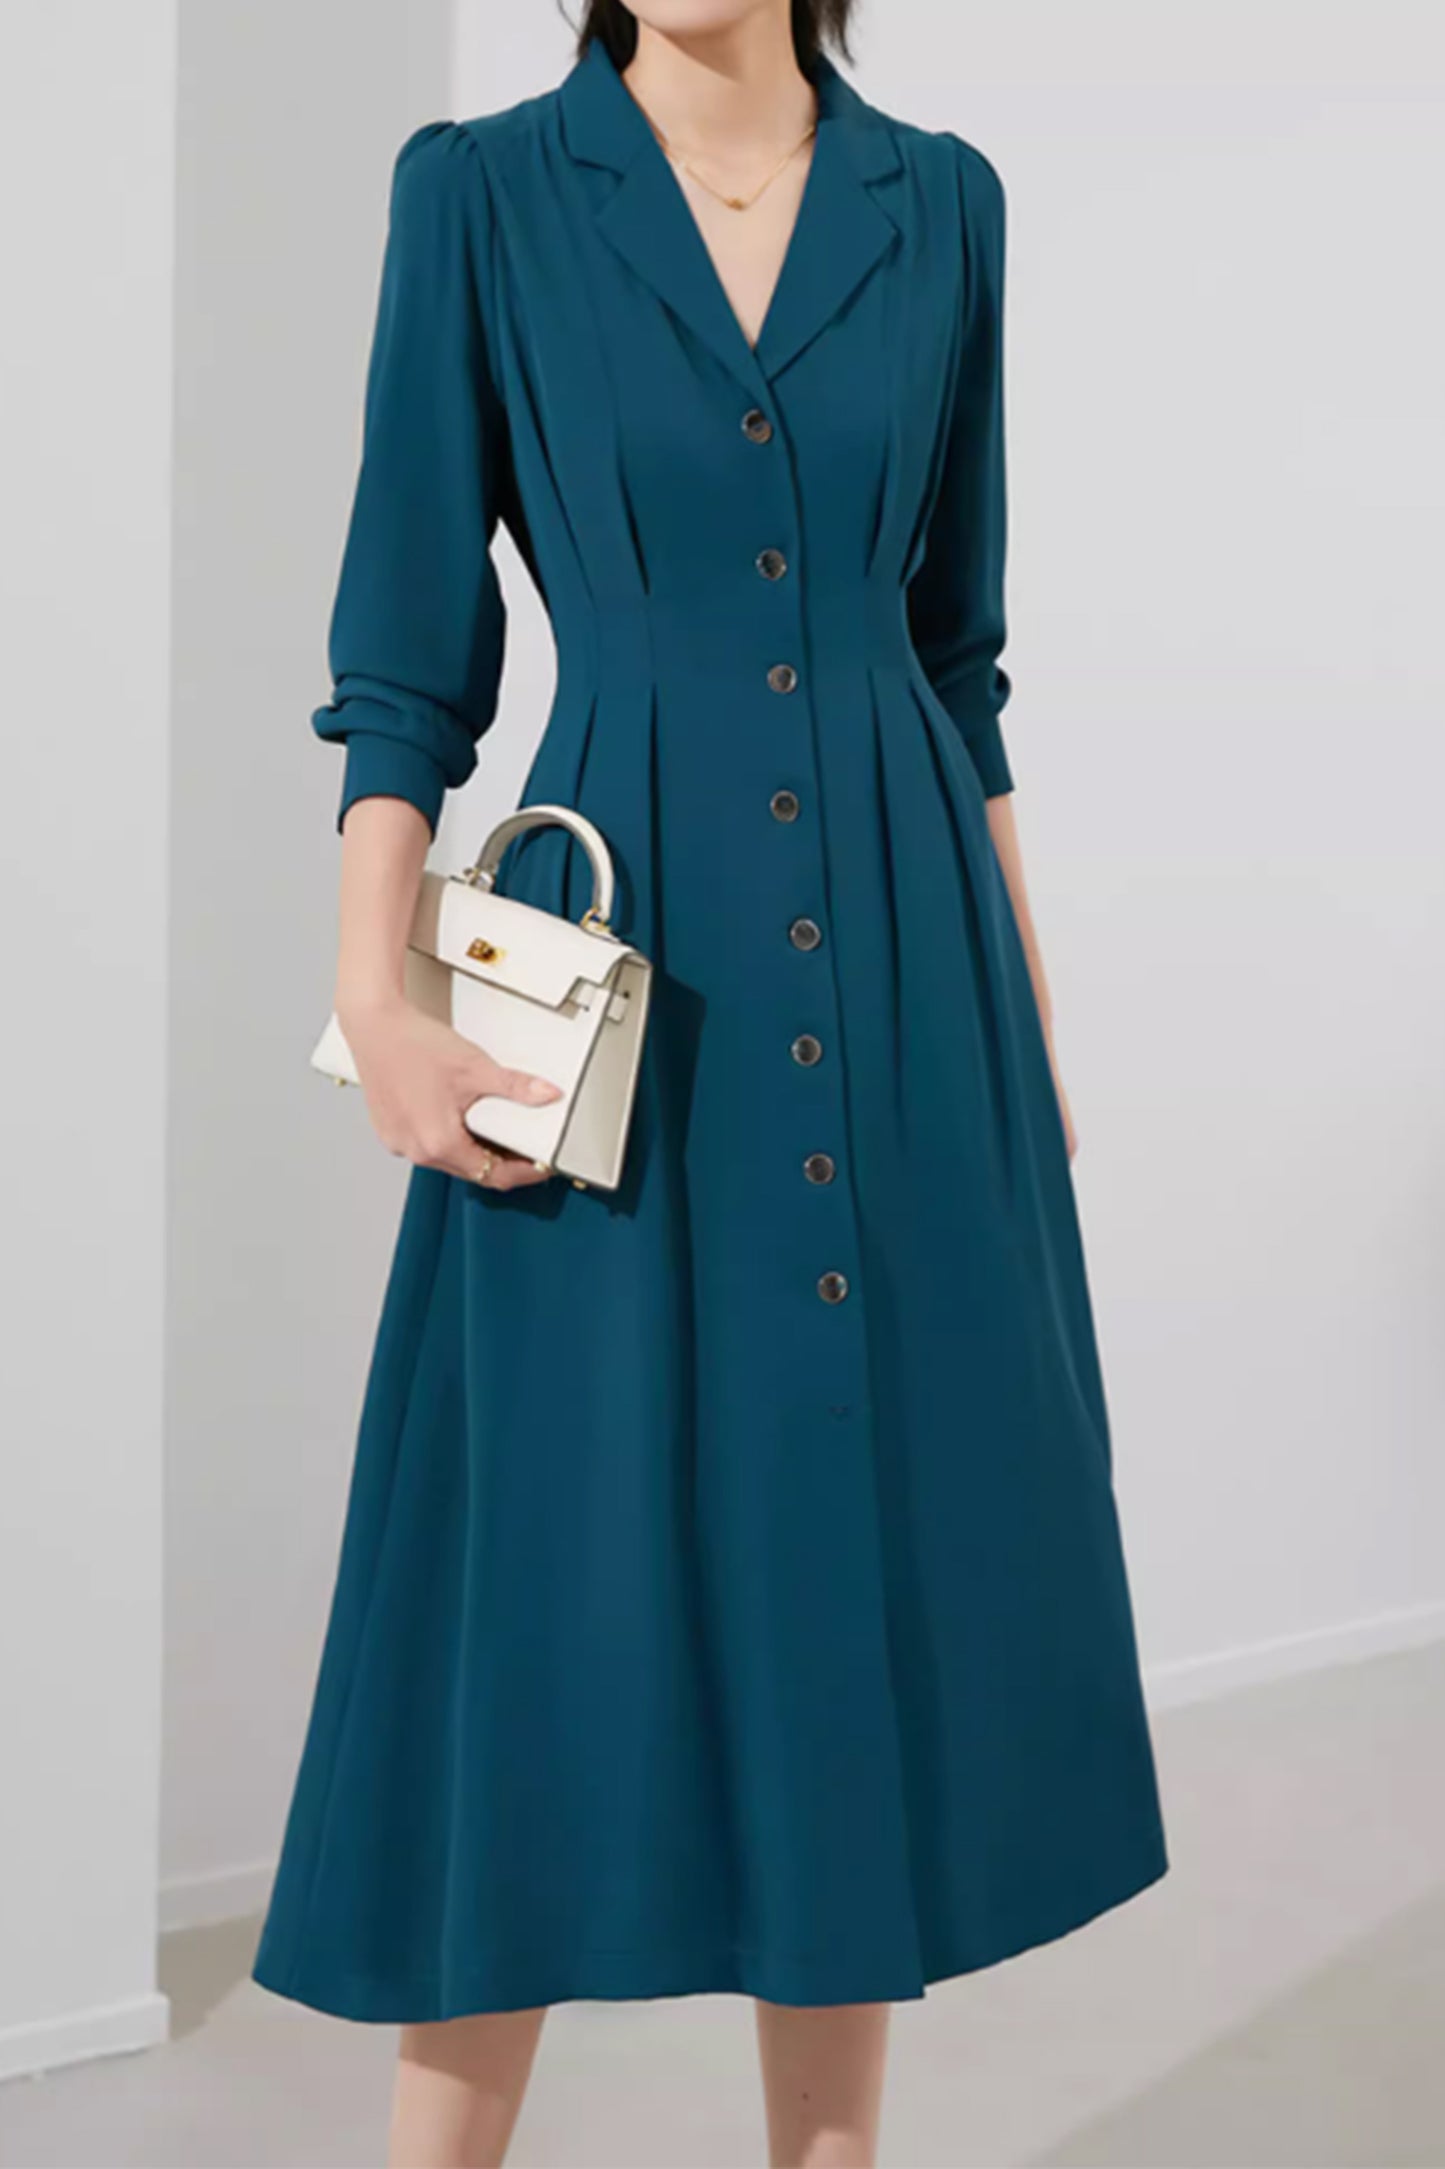 Button up long sleeves spring dresses women 4878